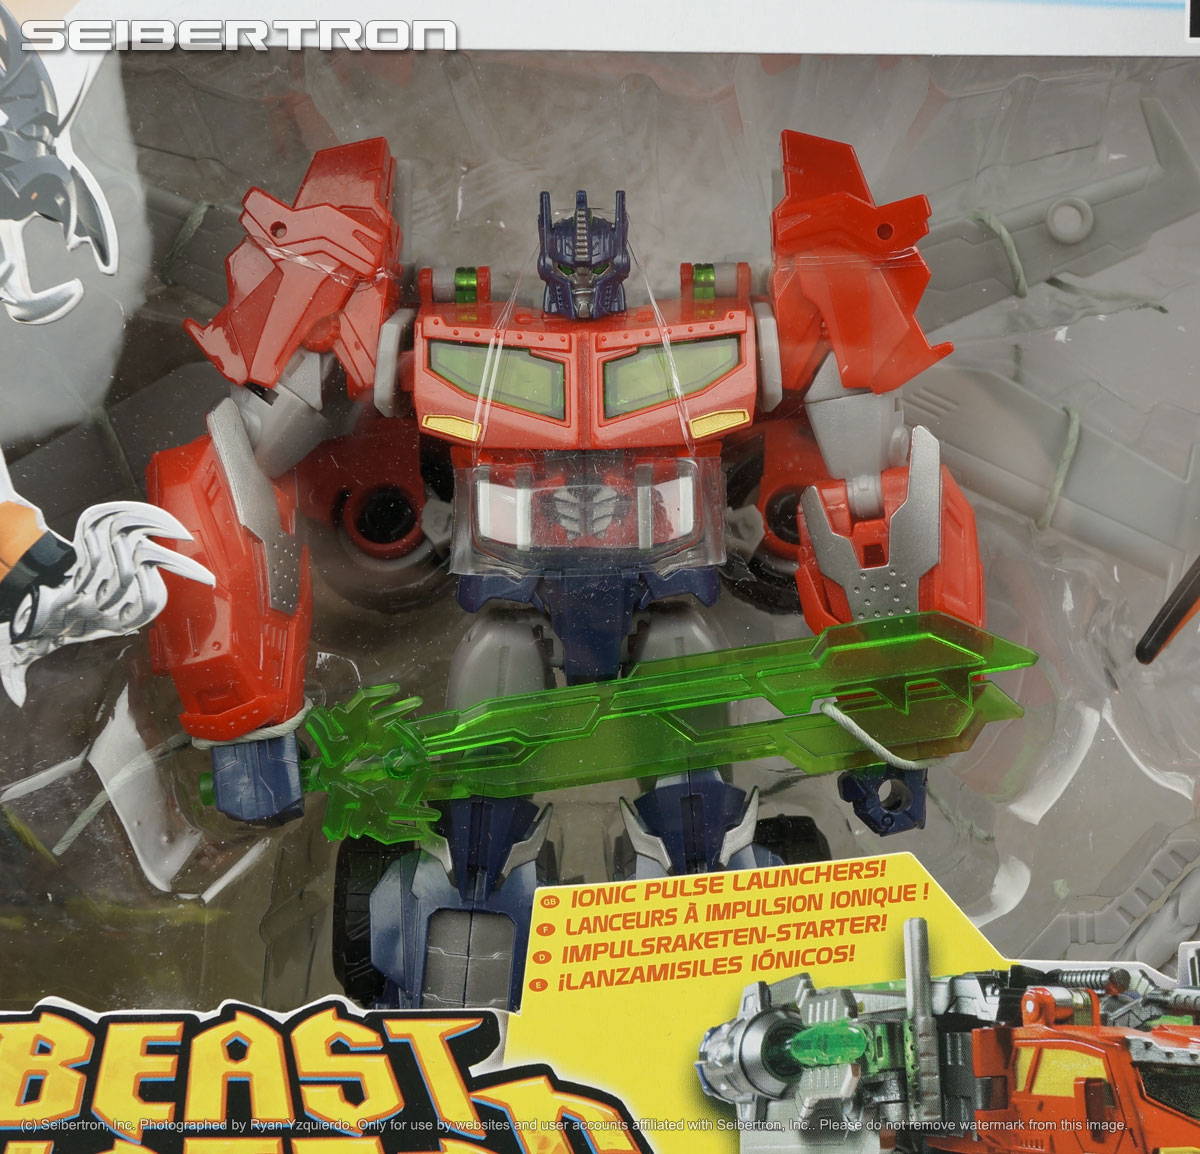 Transformers, Teenage Mutant Ninja Turtles, Masters of the Universe, Comic Books and more! listings from Seibertron.com: Transformers Prime Beast Hunters Voyager Class OPTIMUS PRIME + PREDAKING with Prototype Predacon Symbol UK Exclusive 2-Pack New 2013